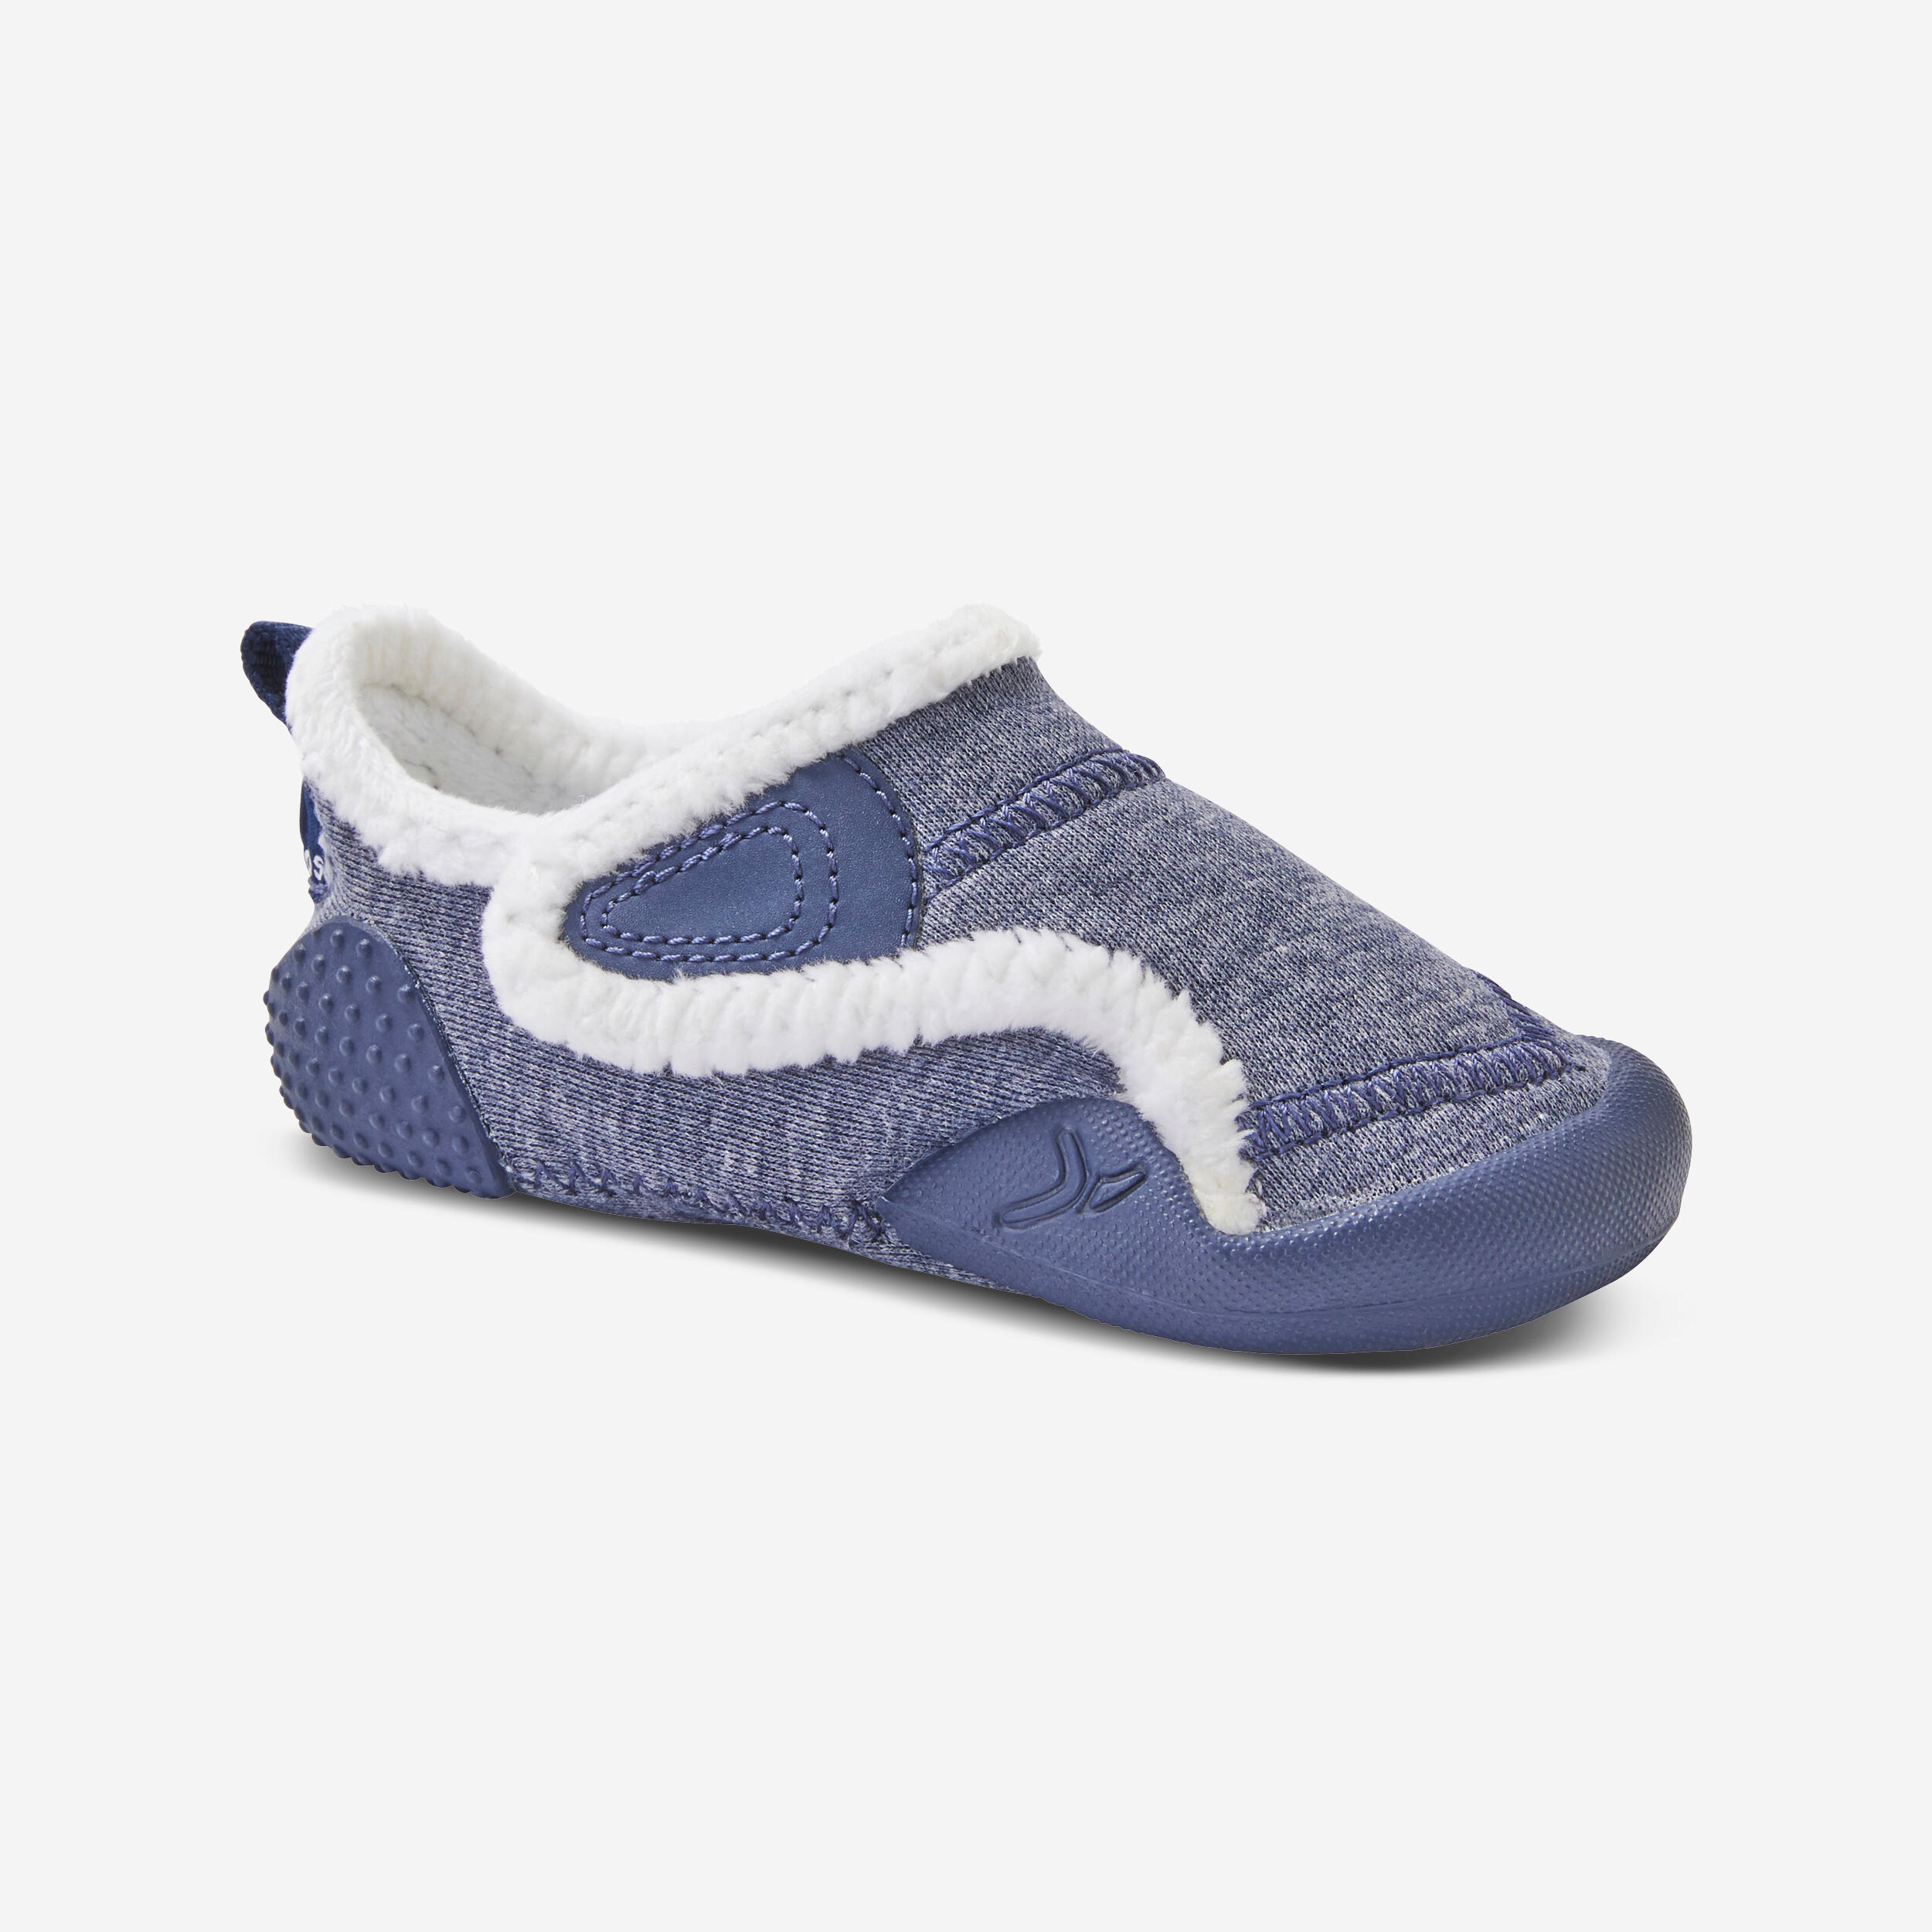 DOMYOS Kids' Soft and Non-Slip Bootee